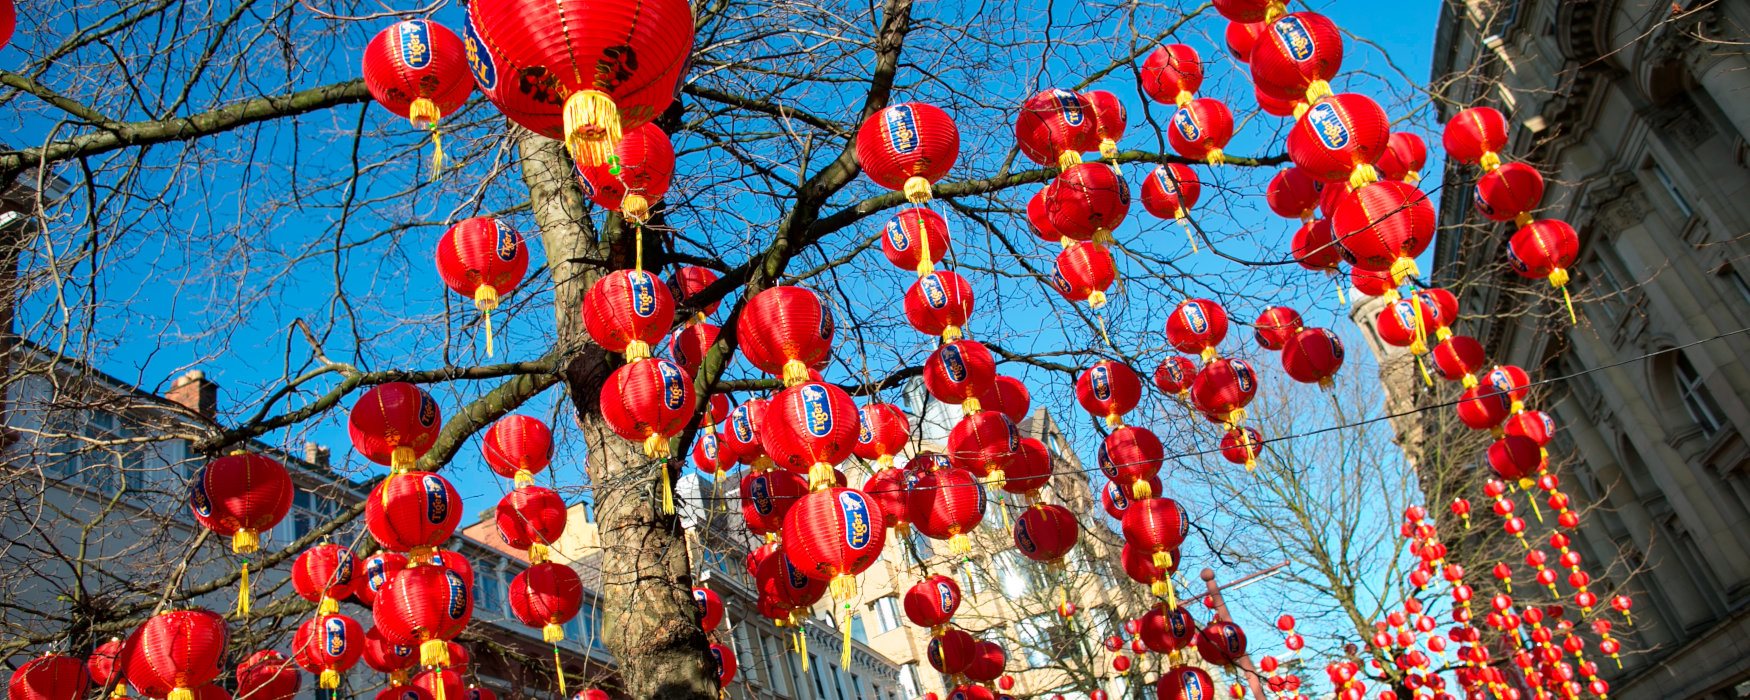 Red lanterns hang from a tree in St Anns Square for Chinese New Year.